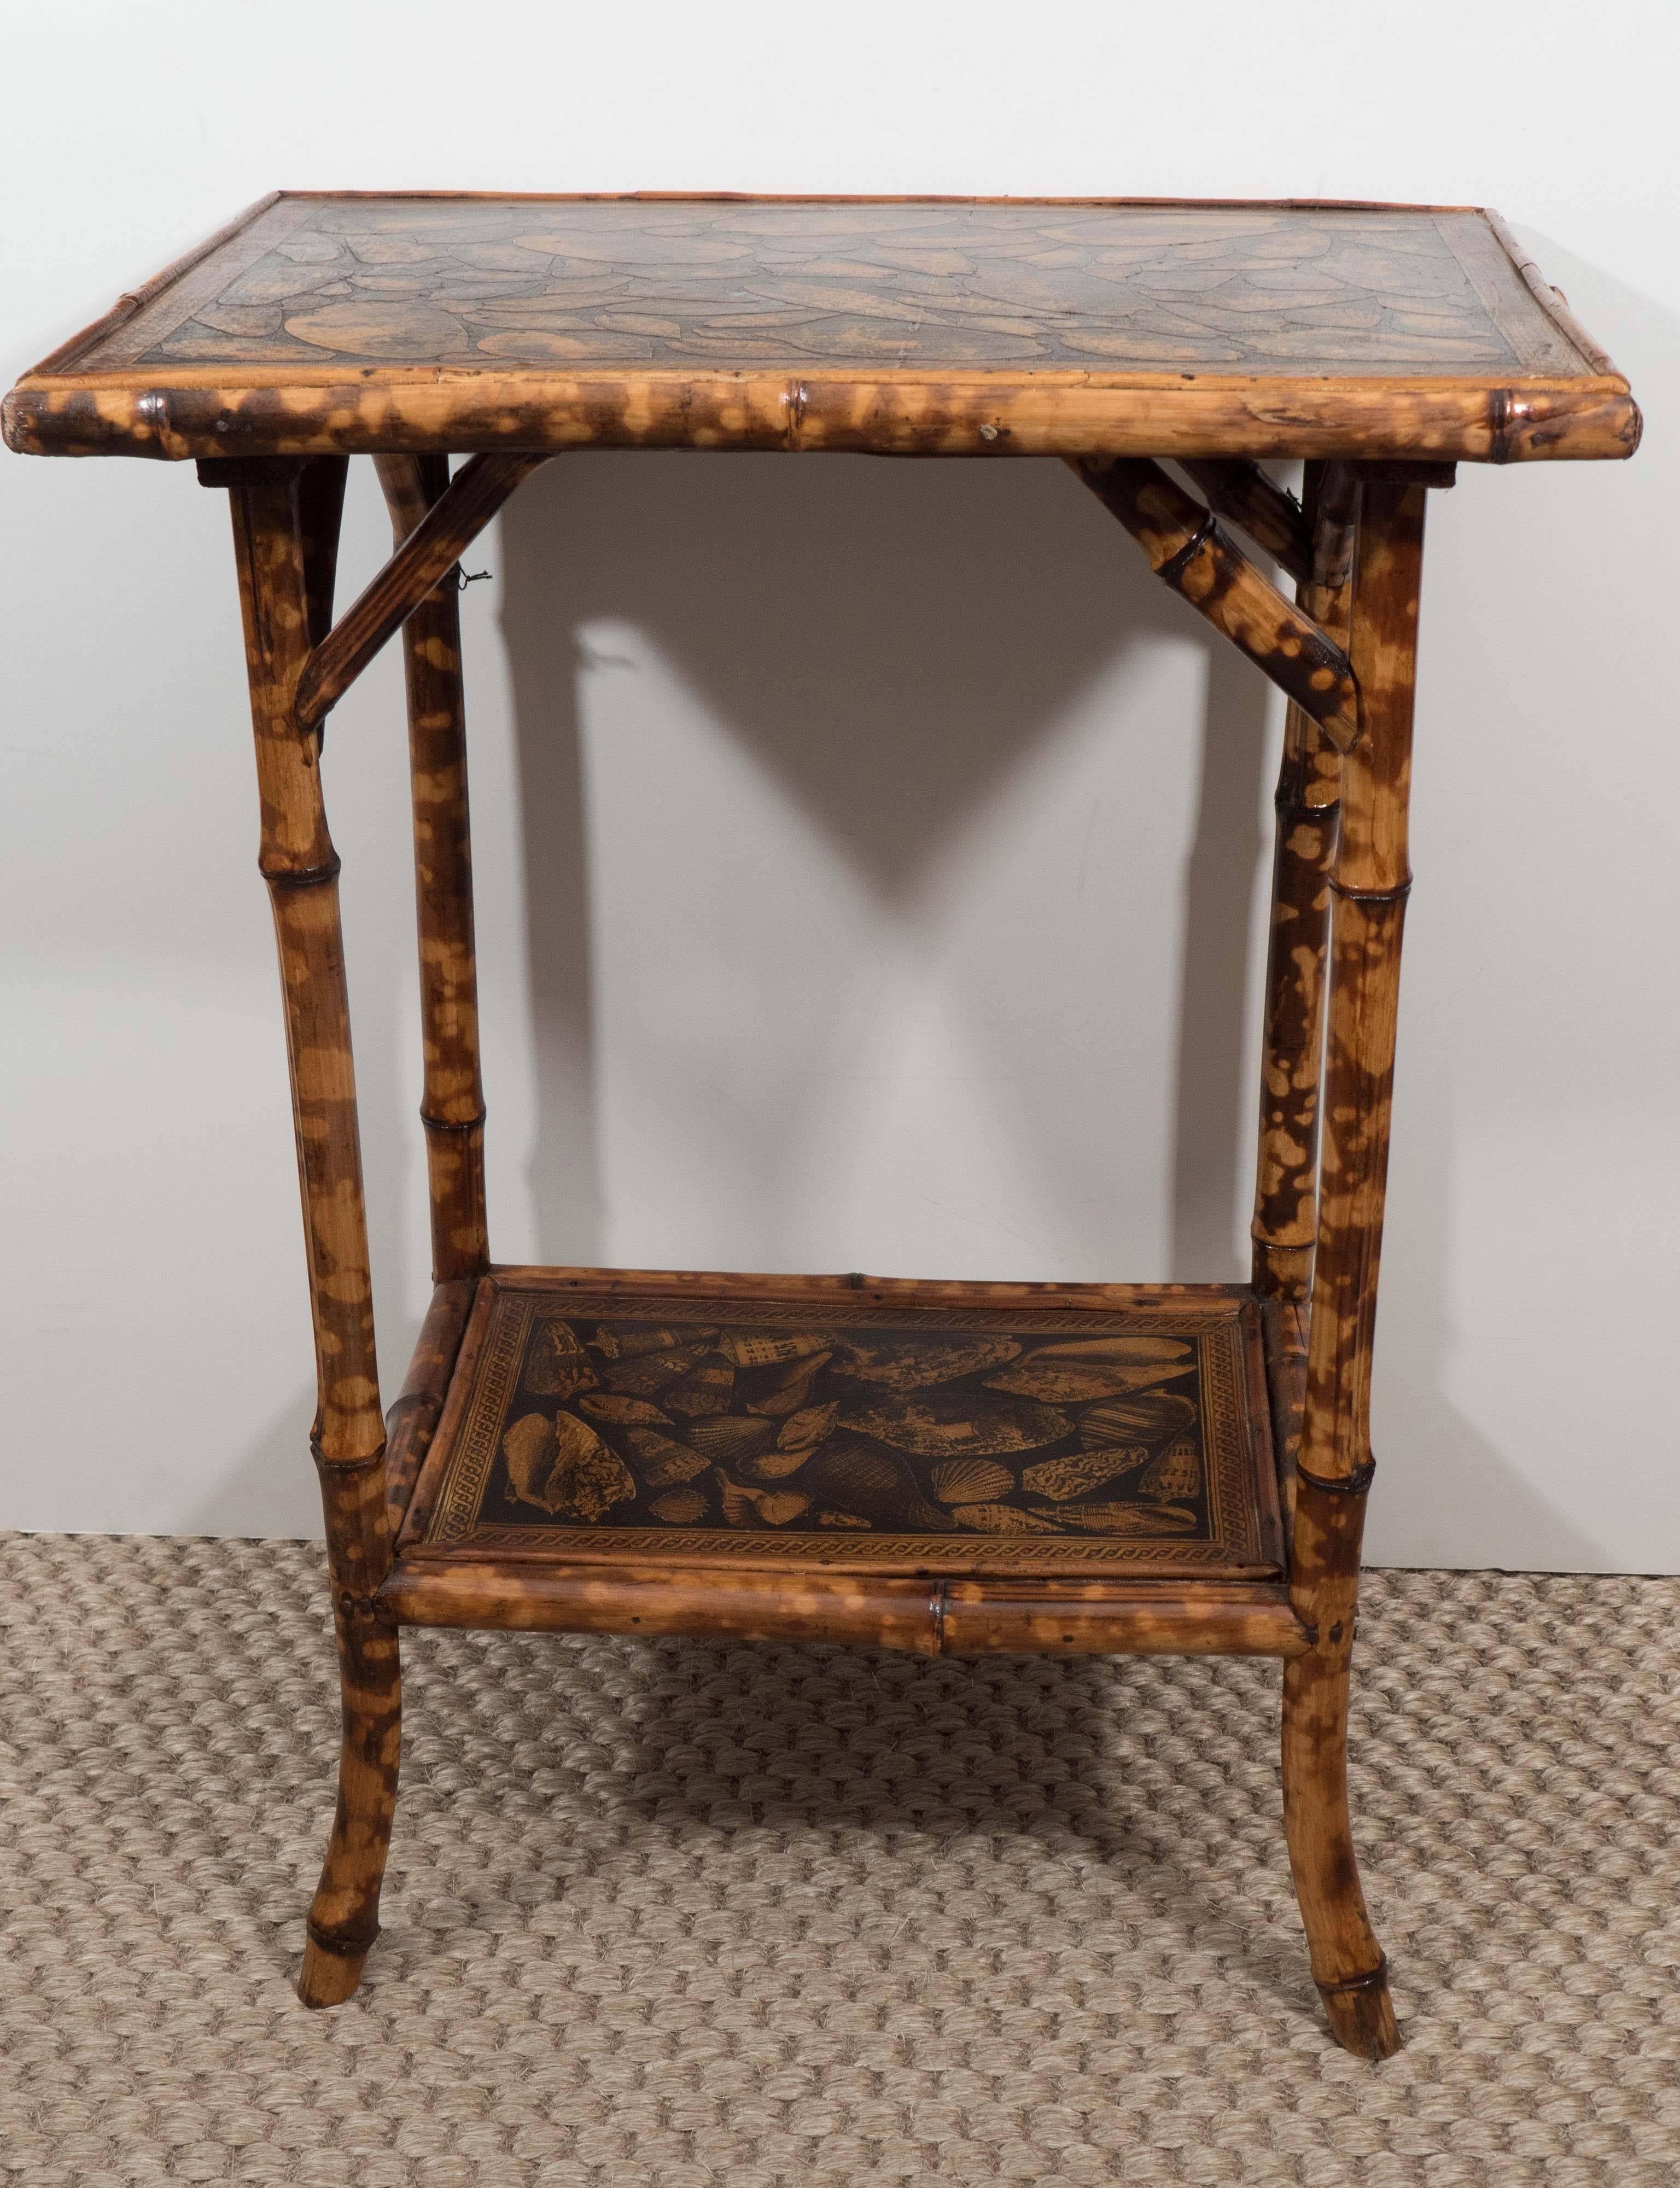 A charming 19th century two-tier rectangular table in beautiful bamboo with recent shell motif decoupage, French splayed feet and strut supports. A jewel of a piece!